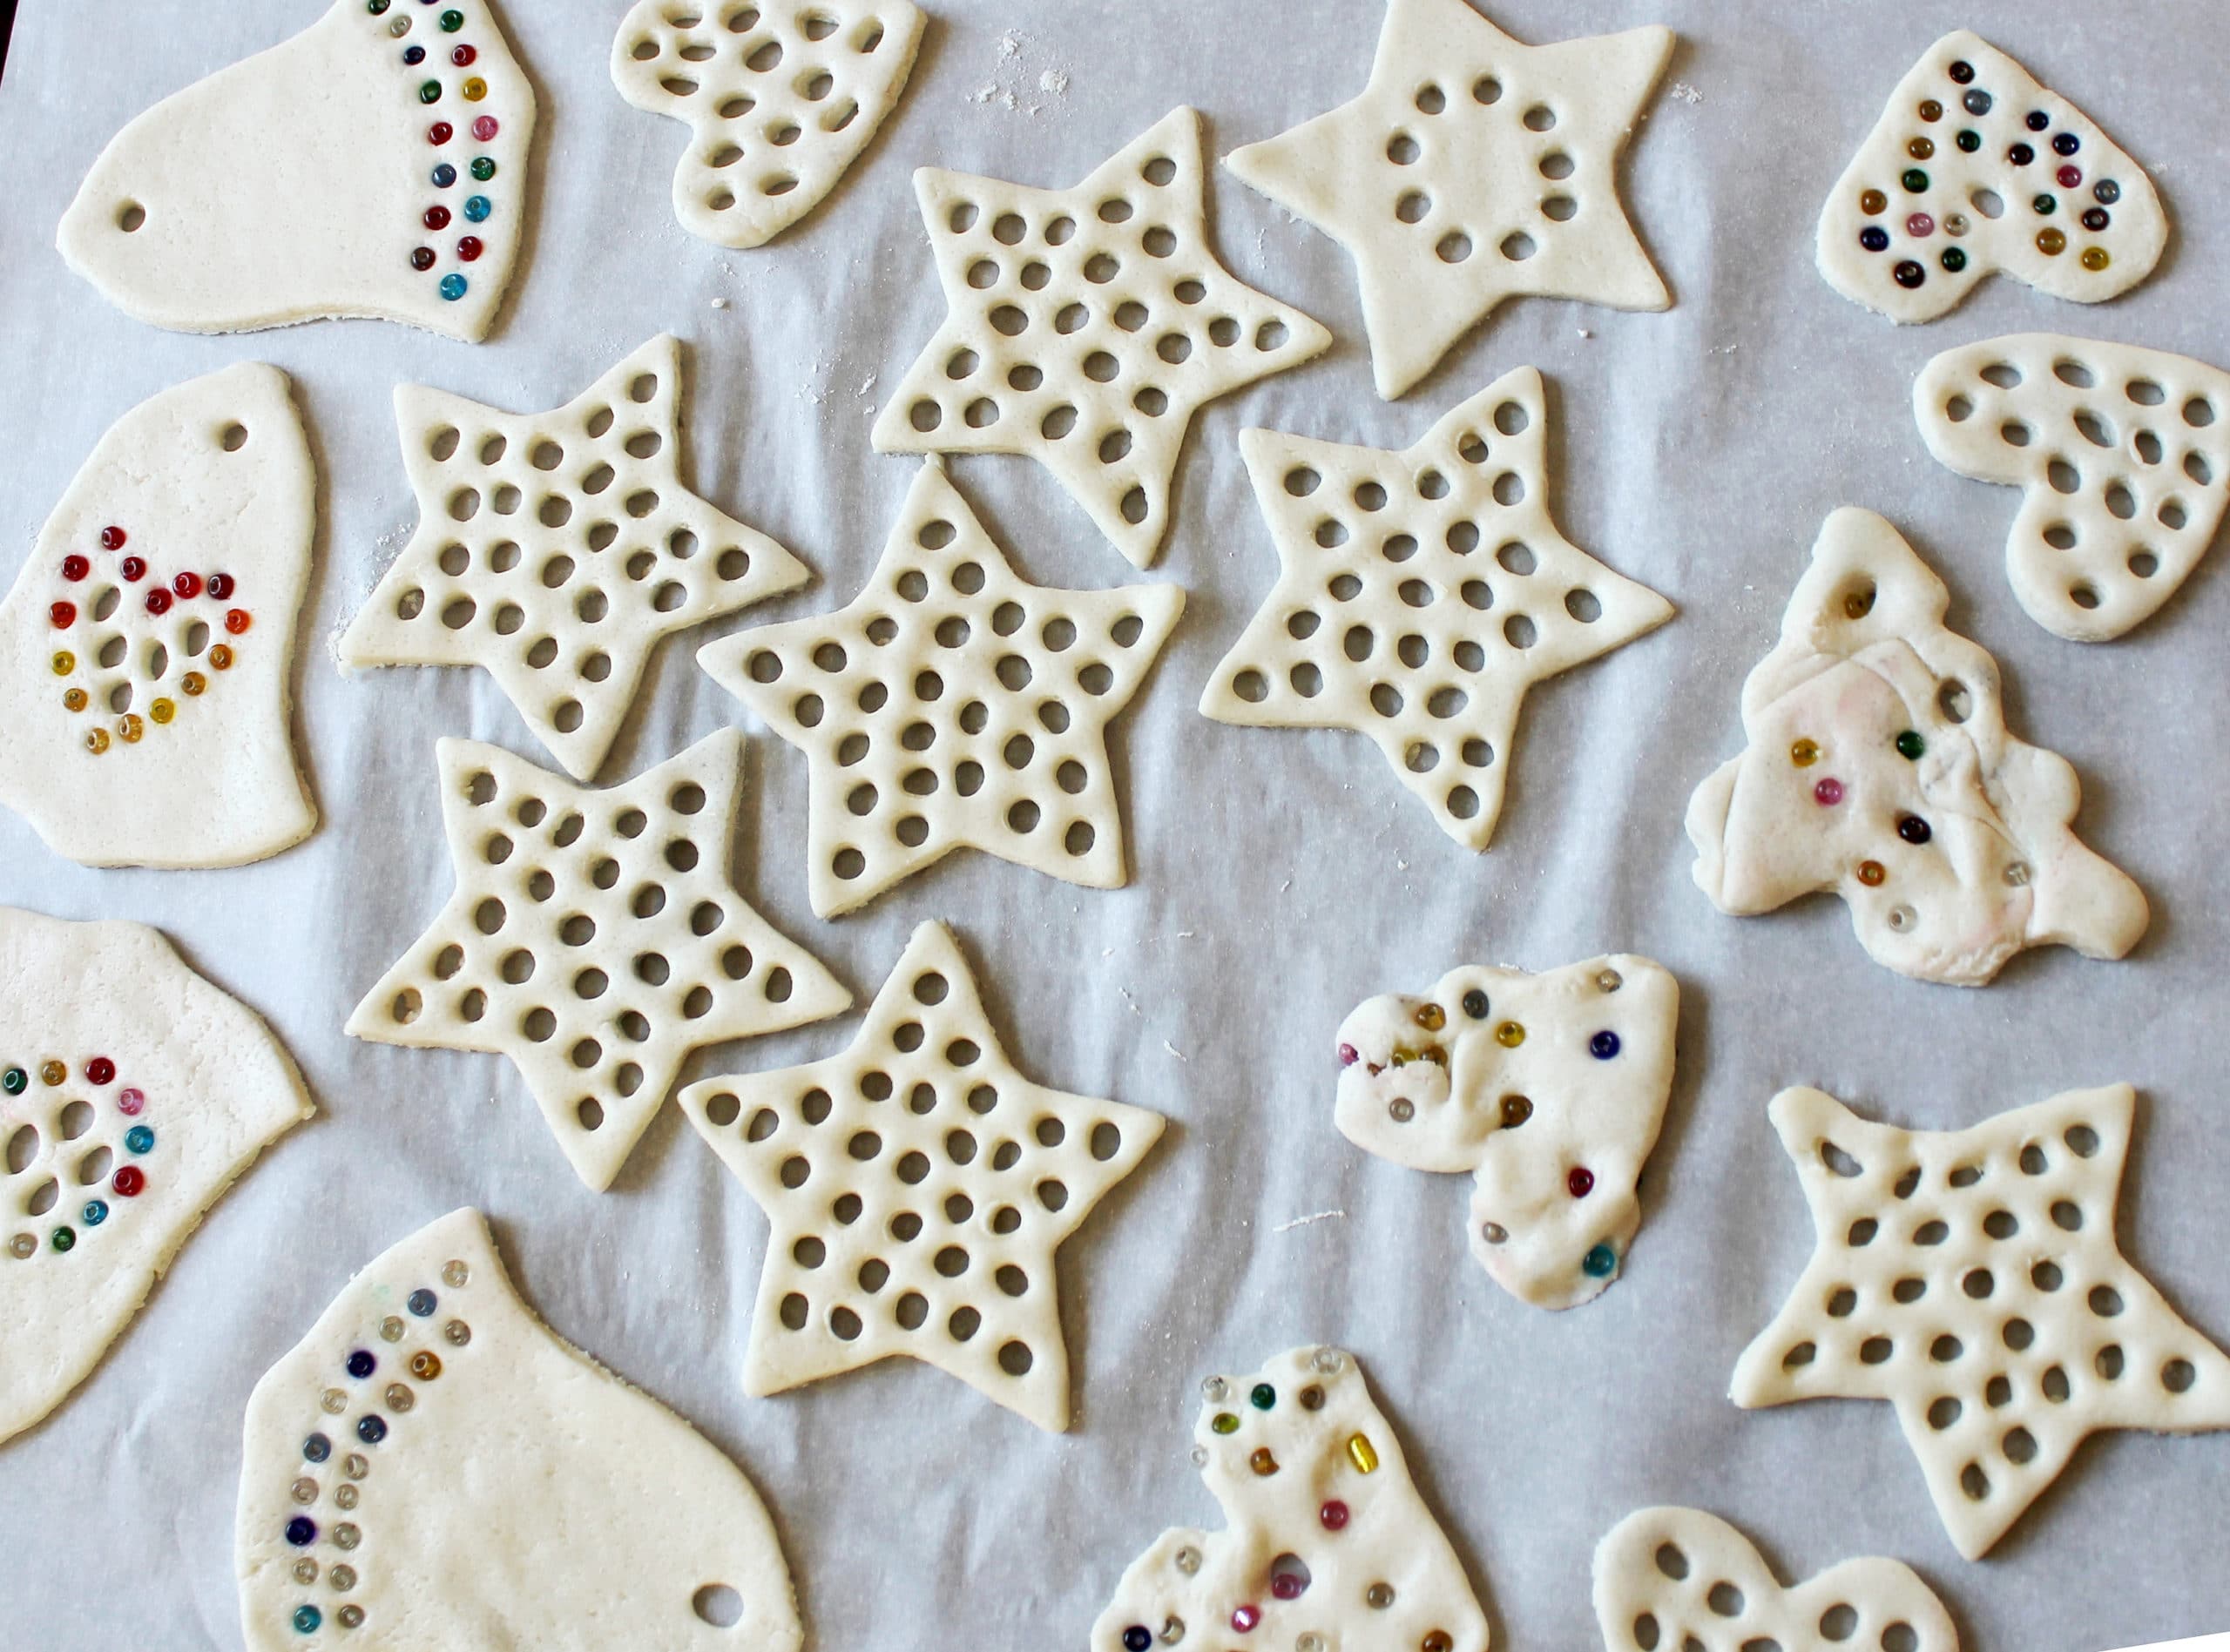 Hole punched salt dough ornaments with beads